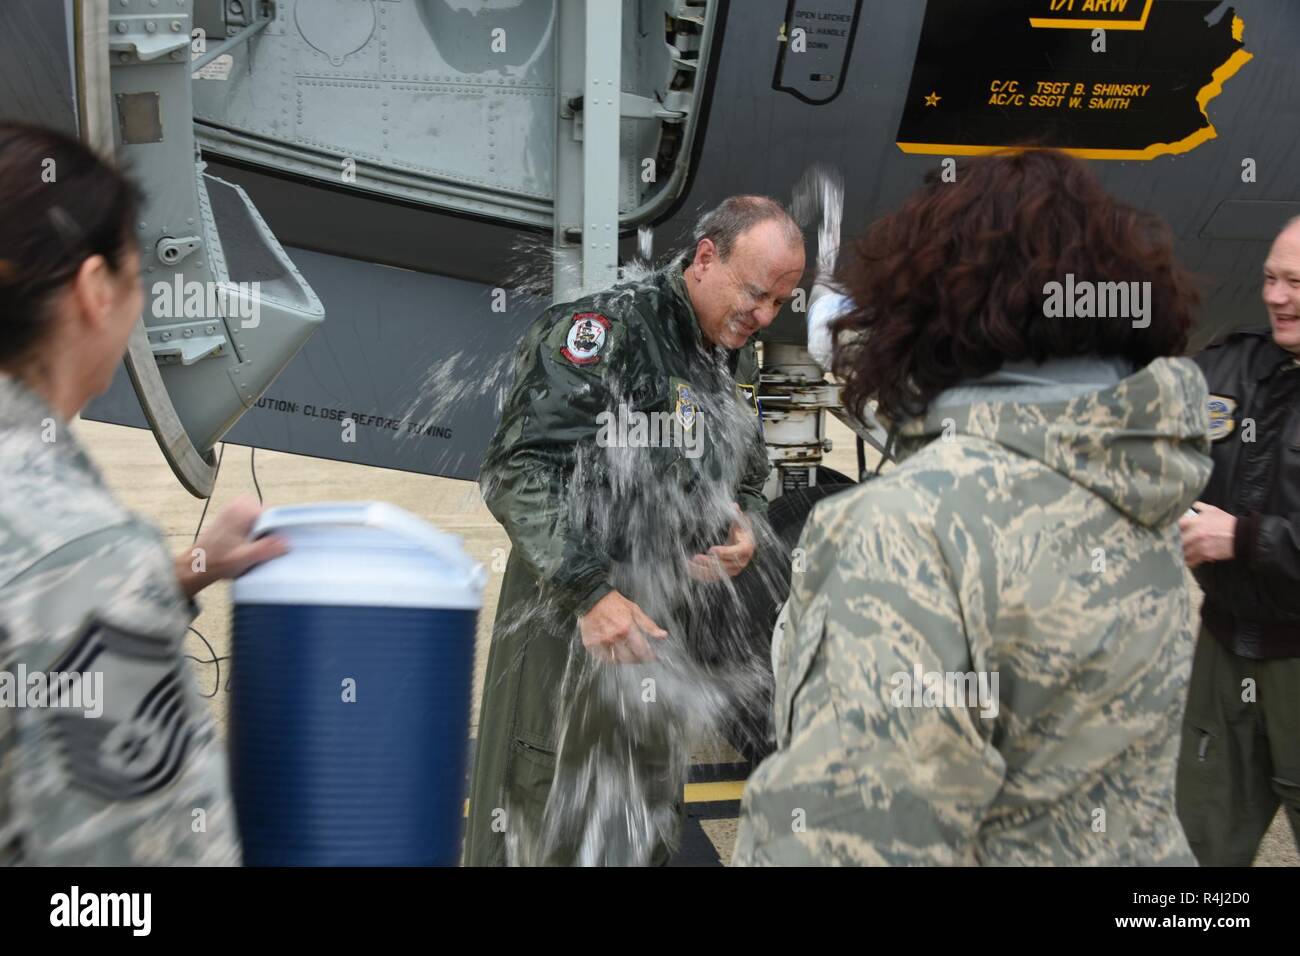 Pennsylvania Air National Guardsman Command Chief Master Sgt. Randy Miller is doused with water by friends in coworkers as he celebrates 39 years of service after his final flight Oct. 26, 2018. Chief Miller retires as the Command Chief Master Sgt. at the 171st Air Refueling Wing where he held that job title since 2011. Chief Miller has over 4300 flight hours. He started his career in the active duty Air Force in 1977 where he served in logistics and postal And in 1983 transferred to the Texas Air National Guard. He took to the sky in 1993 where he trained into the in-flight refueling career f Stock Photo